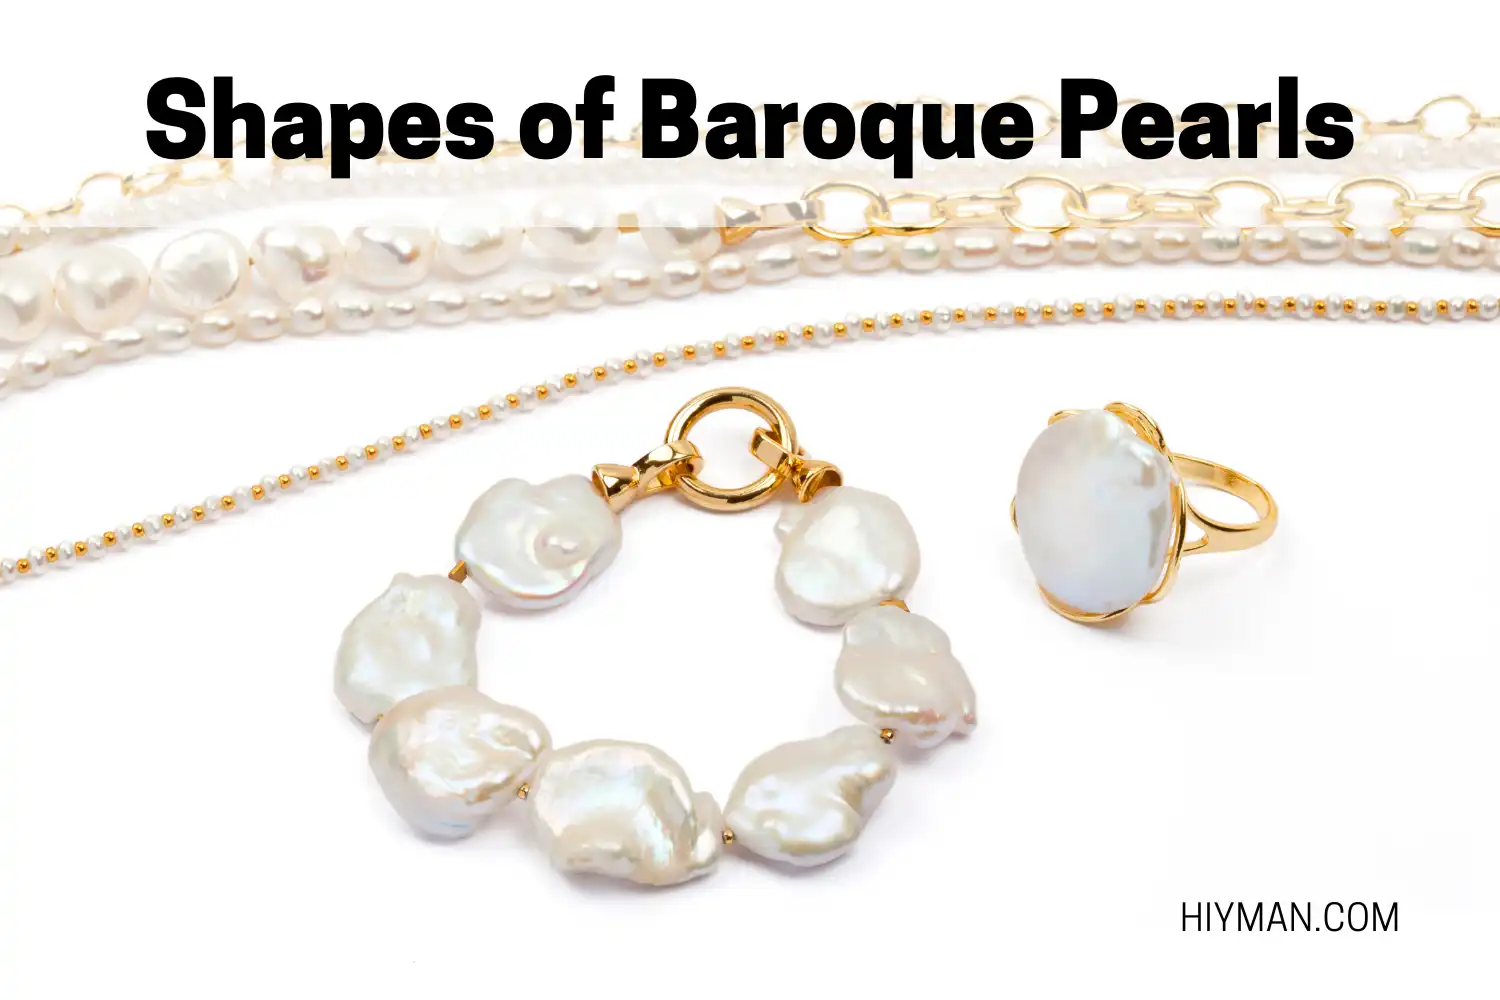 Shapes of Baroque pearls